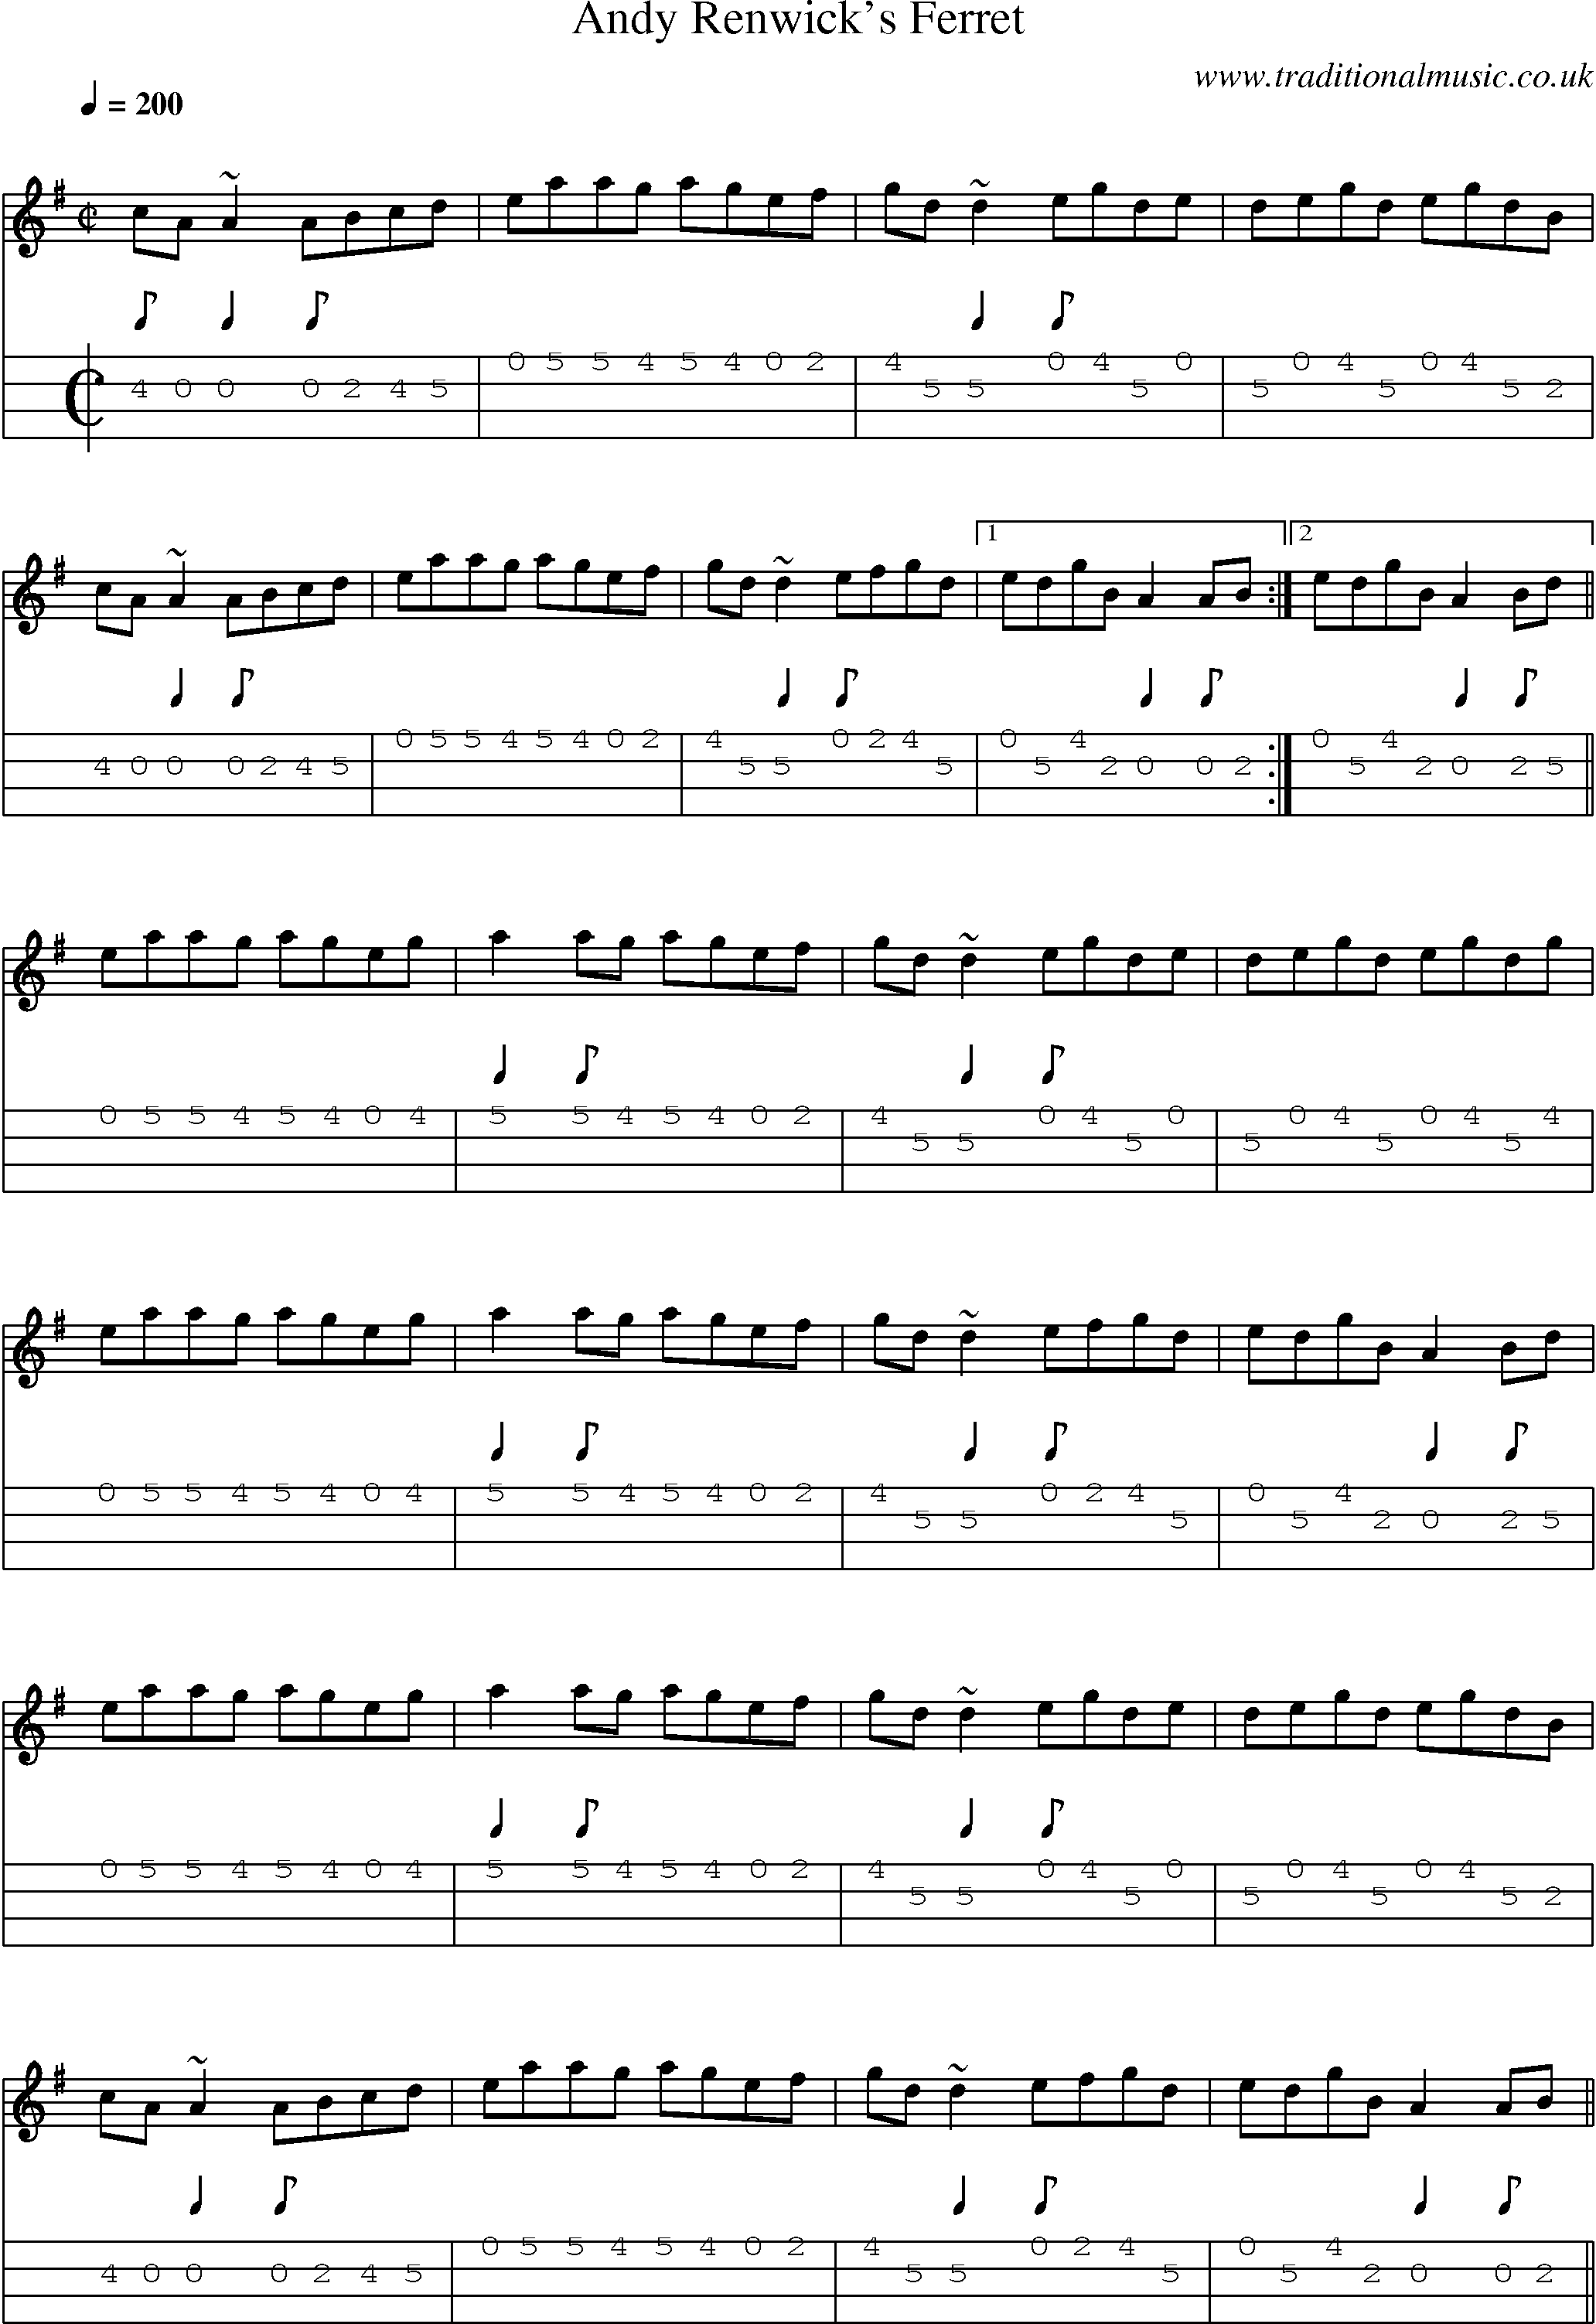 Music Score and Mandolin Tabs for Andy Renwicks Ferret